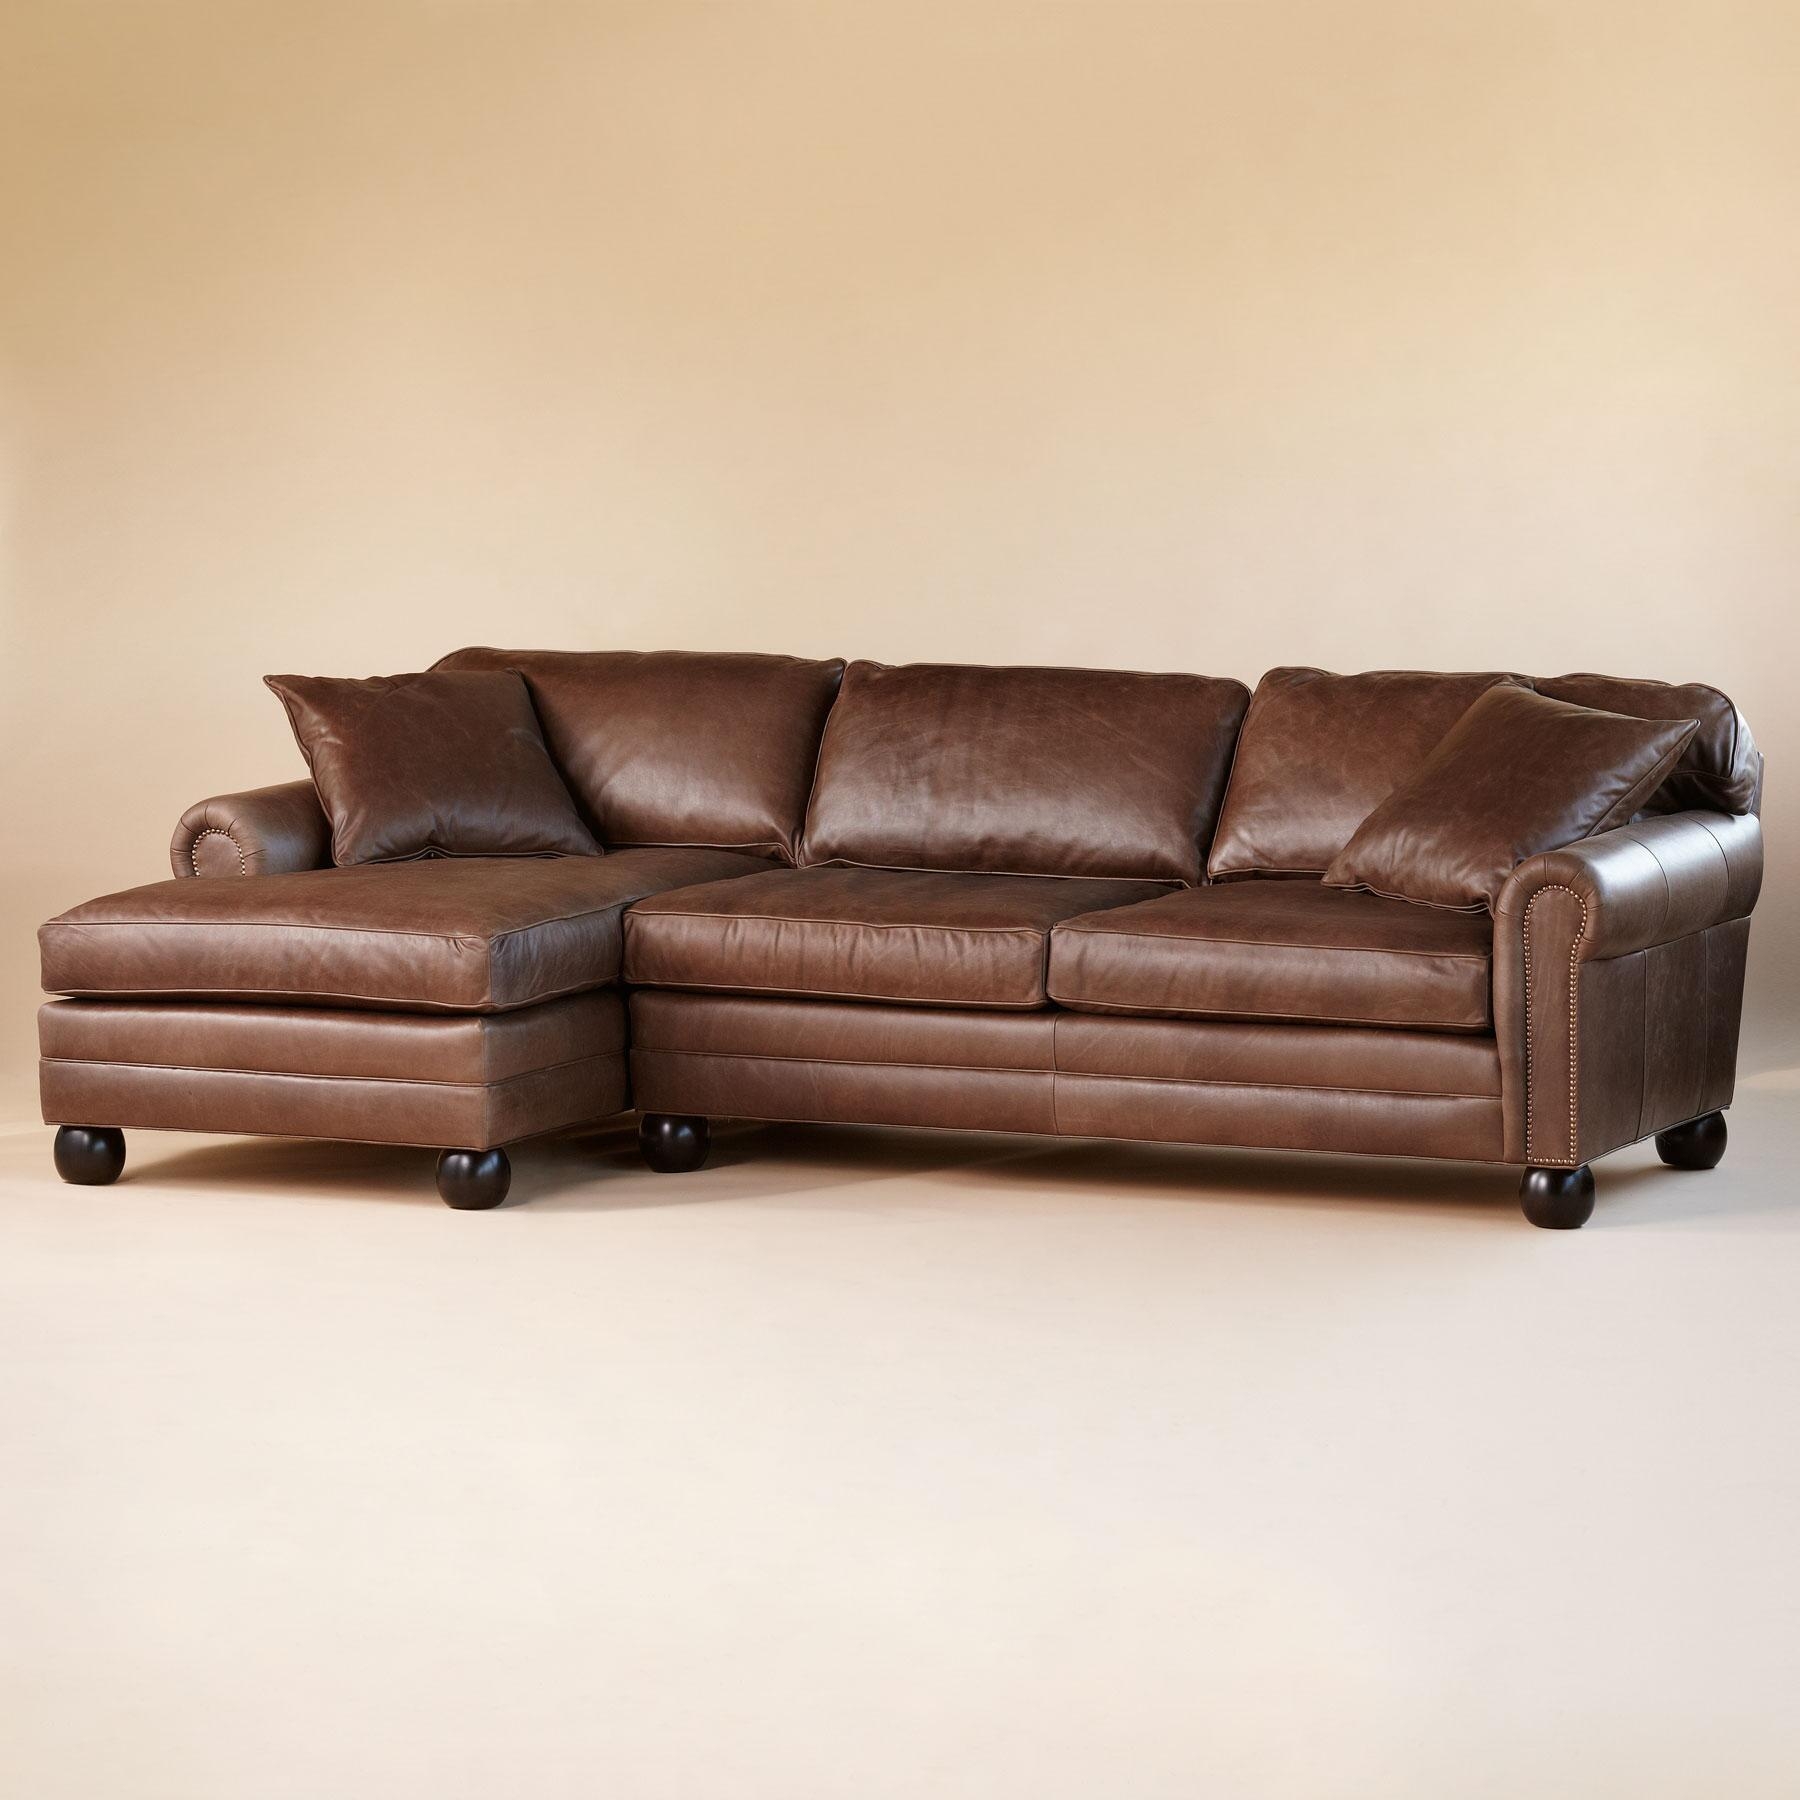 Bernhardt foster leather sectional